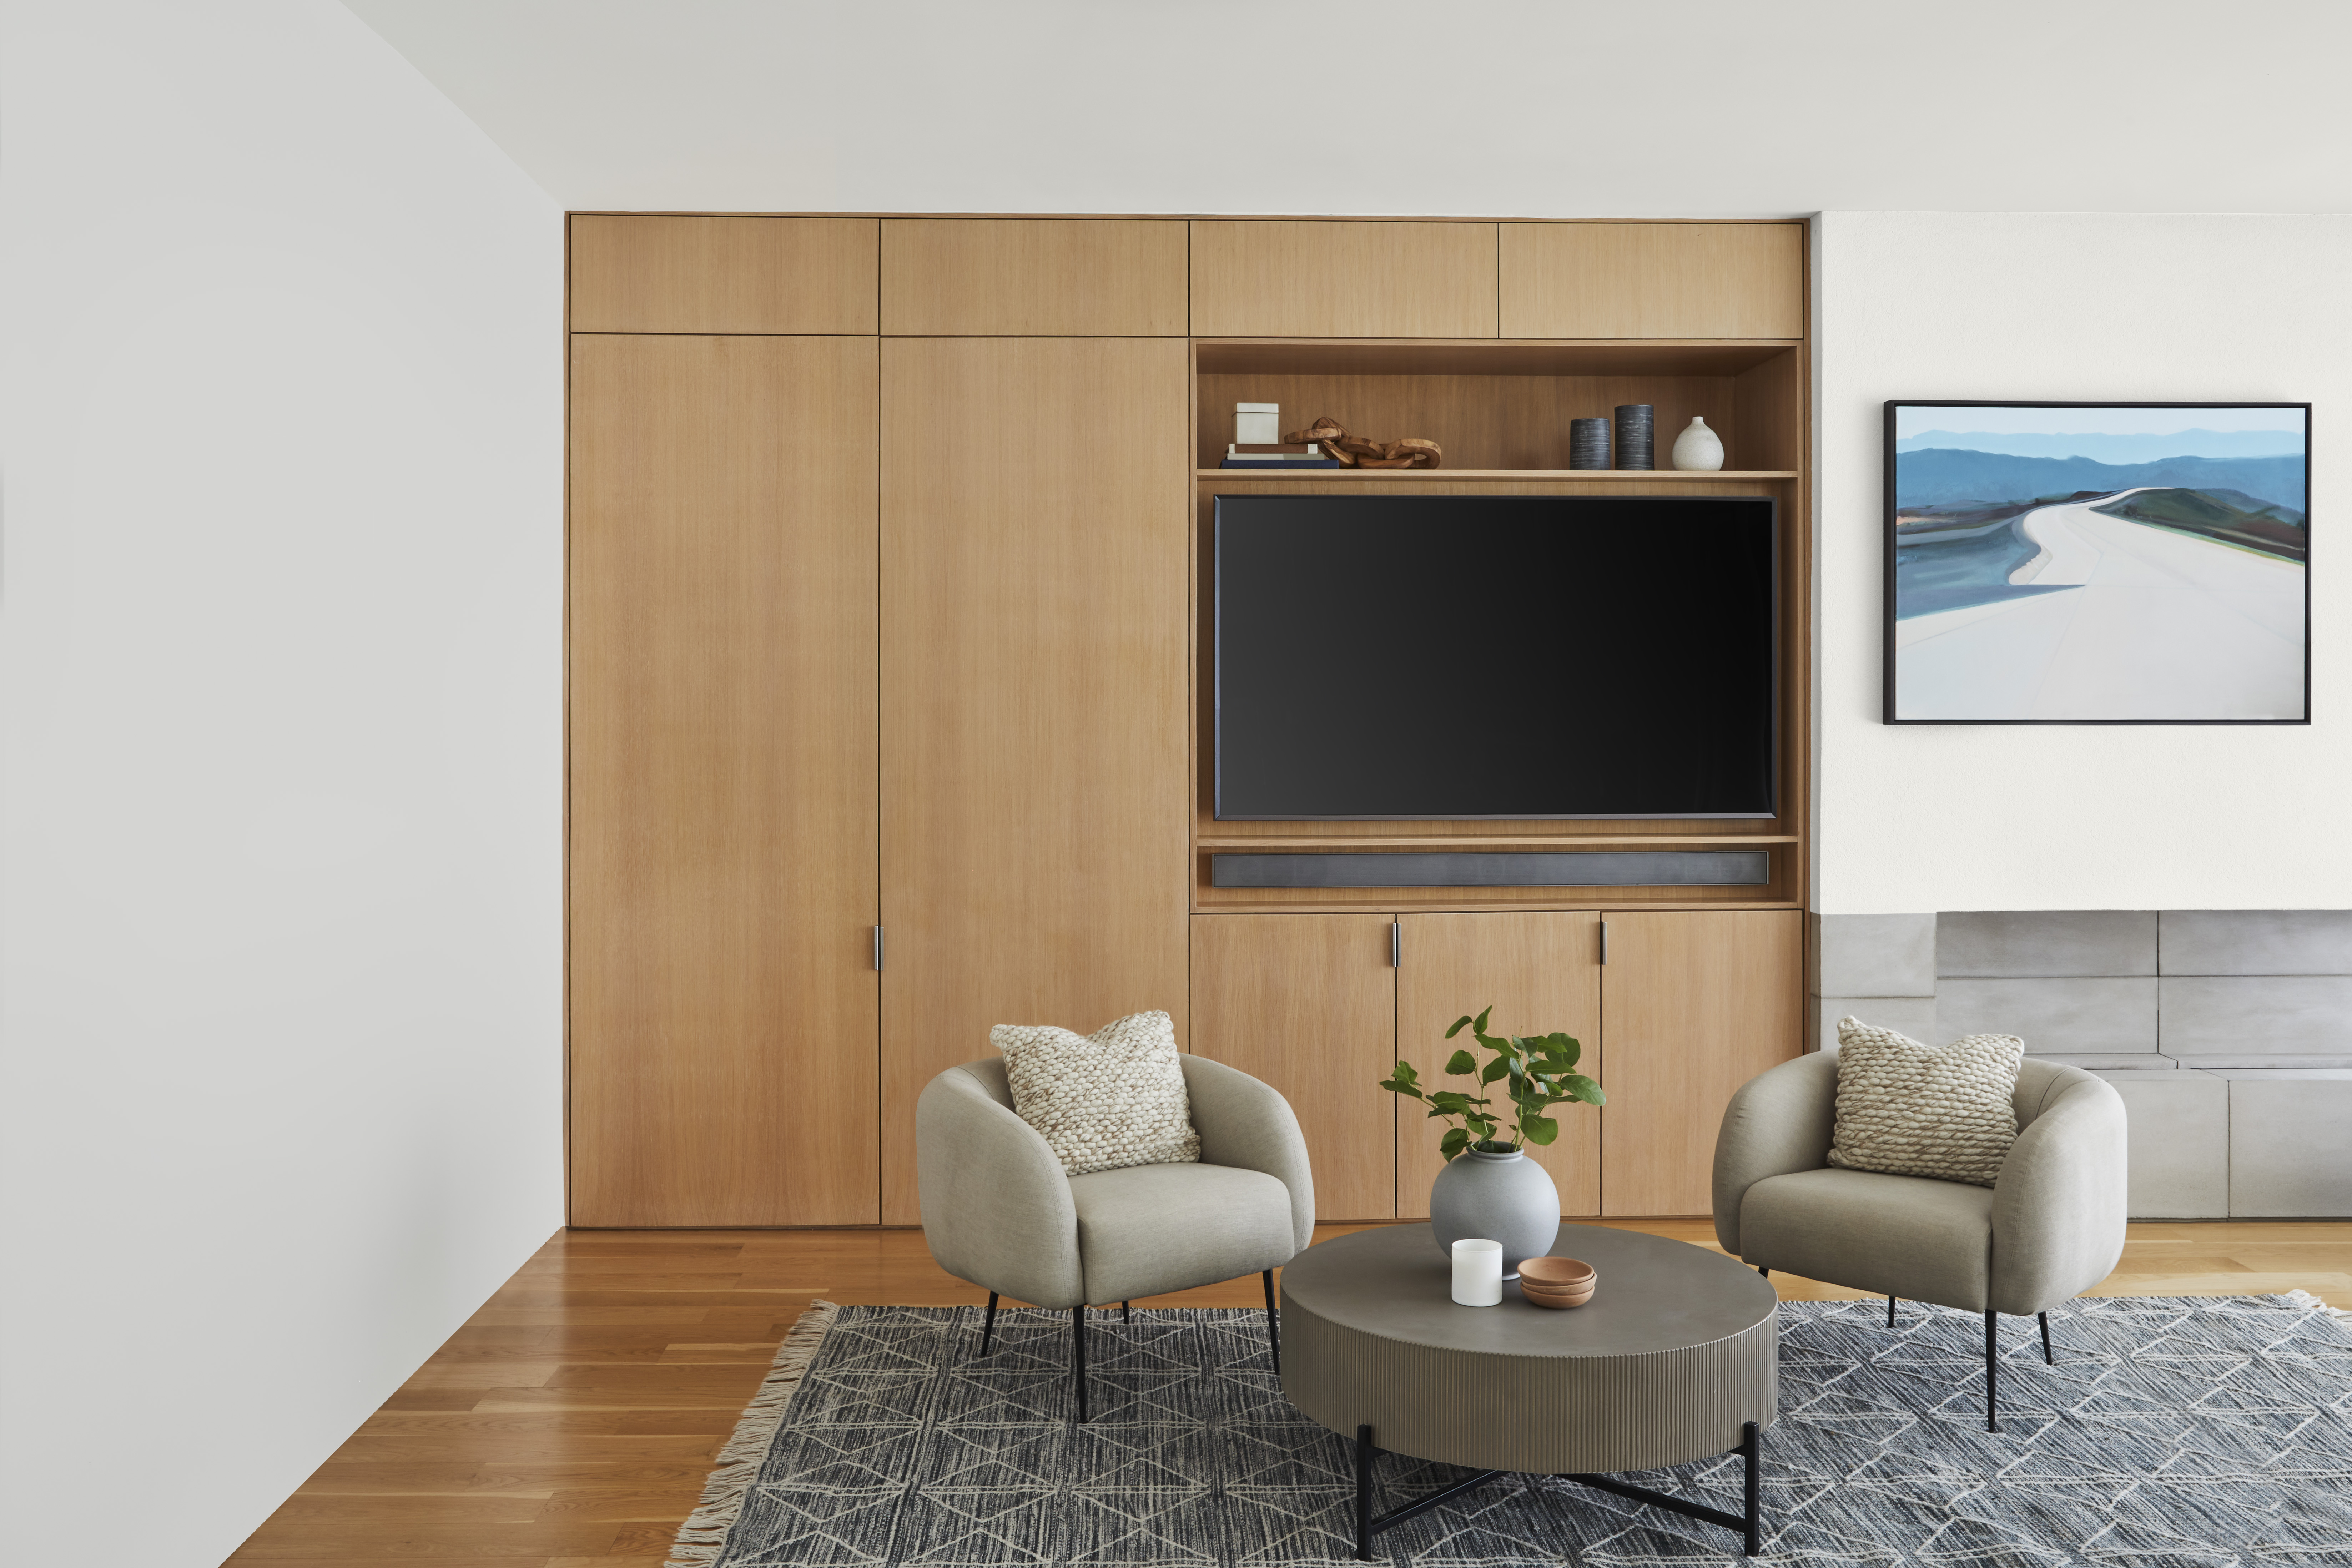 A living room with white walls and a built-in wood media unit and cabinets